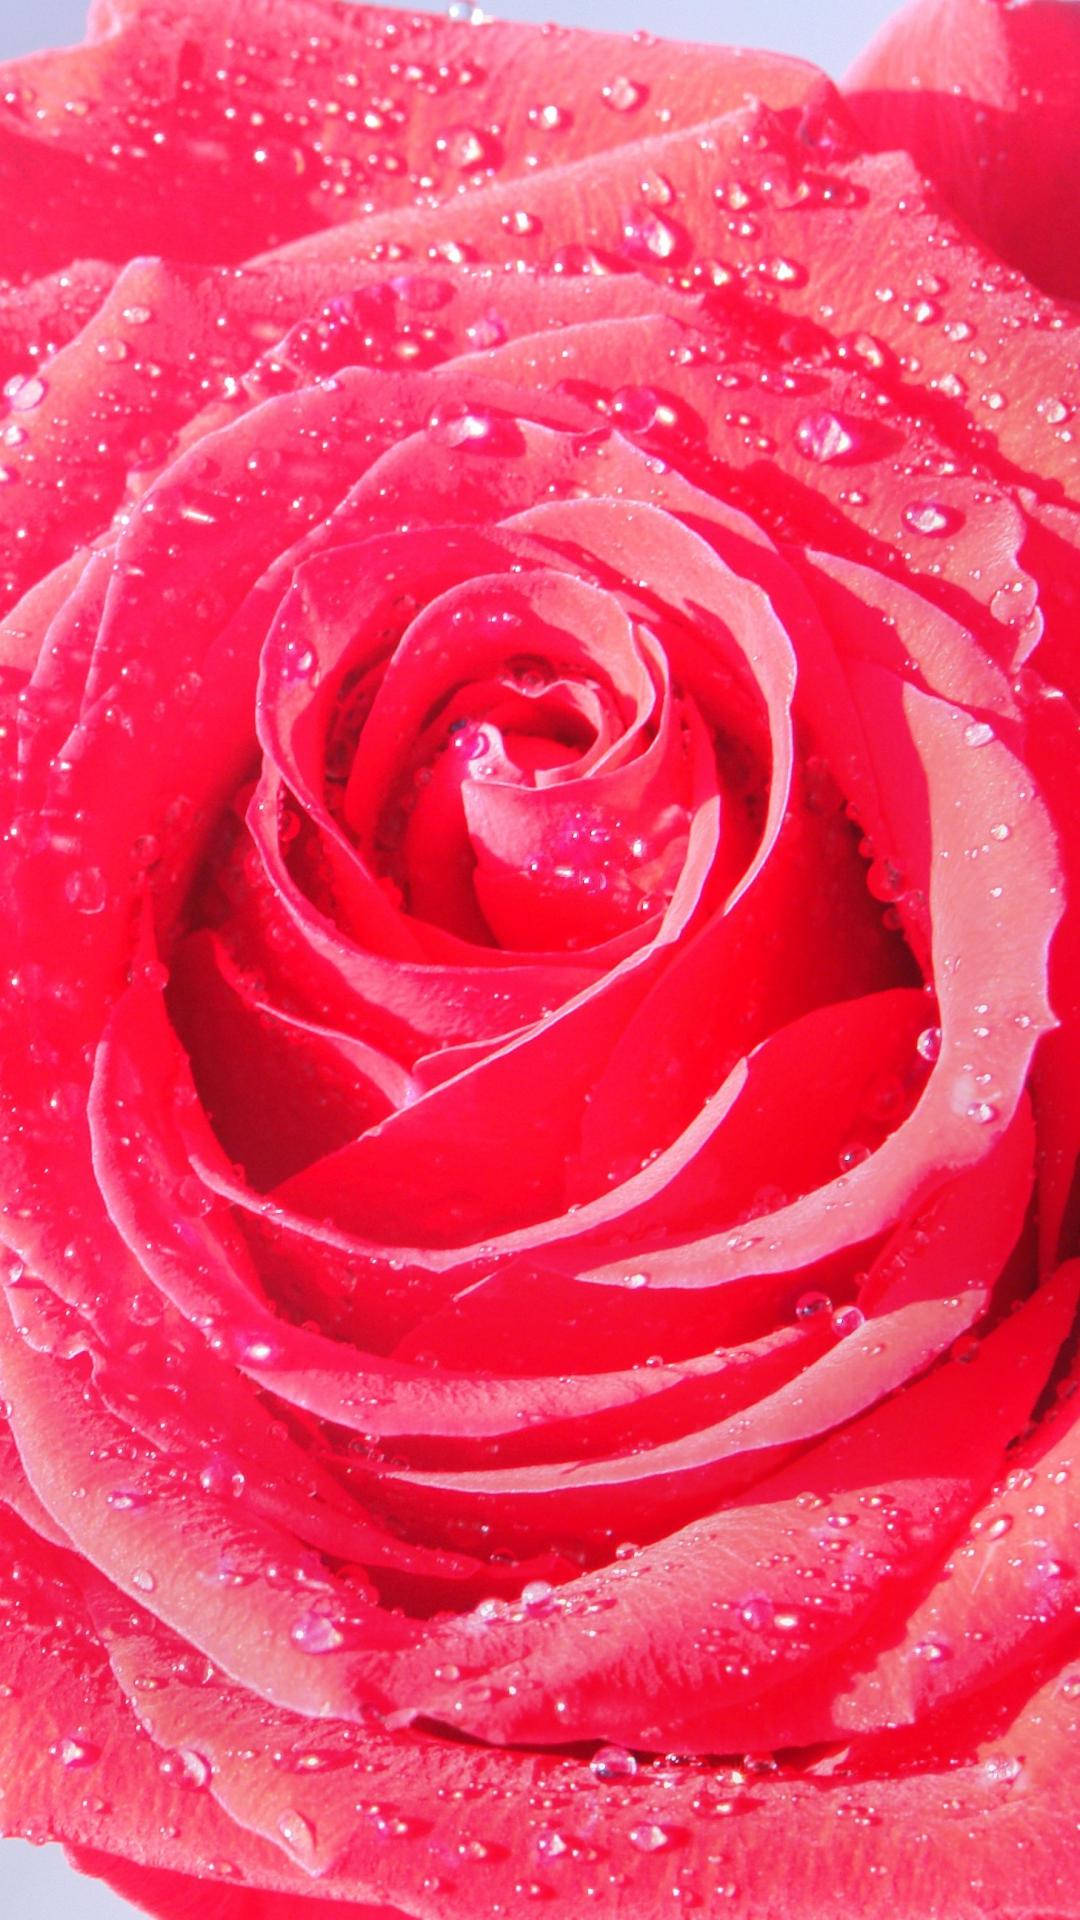 A Stunning Macro Shot Of A Pink Rose Bloomed To Perfection On An Iphone.